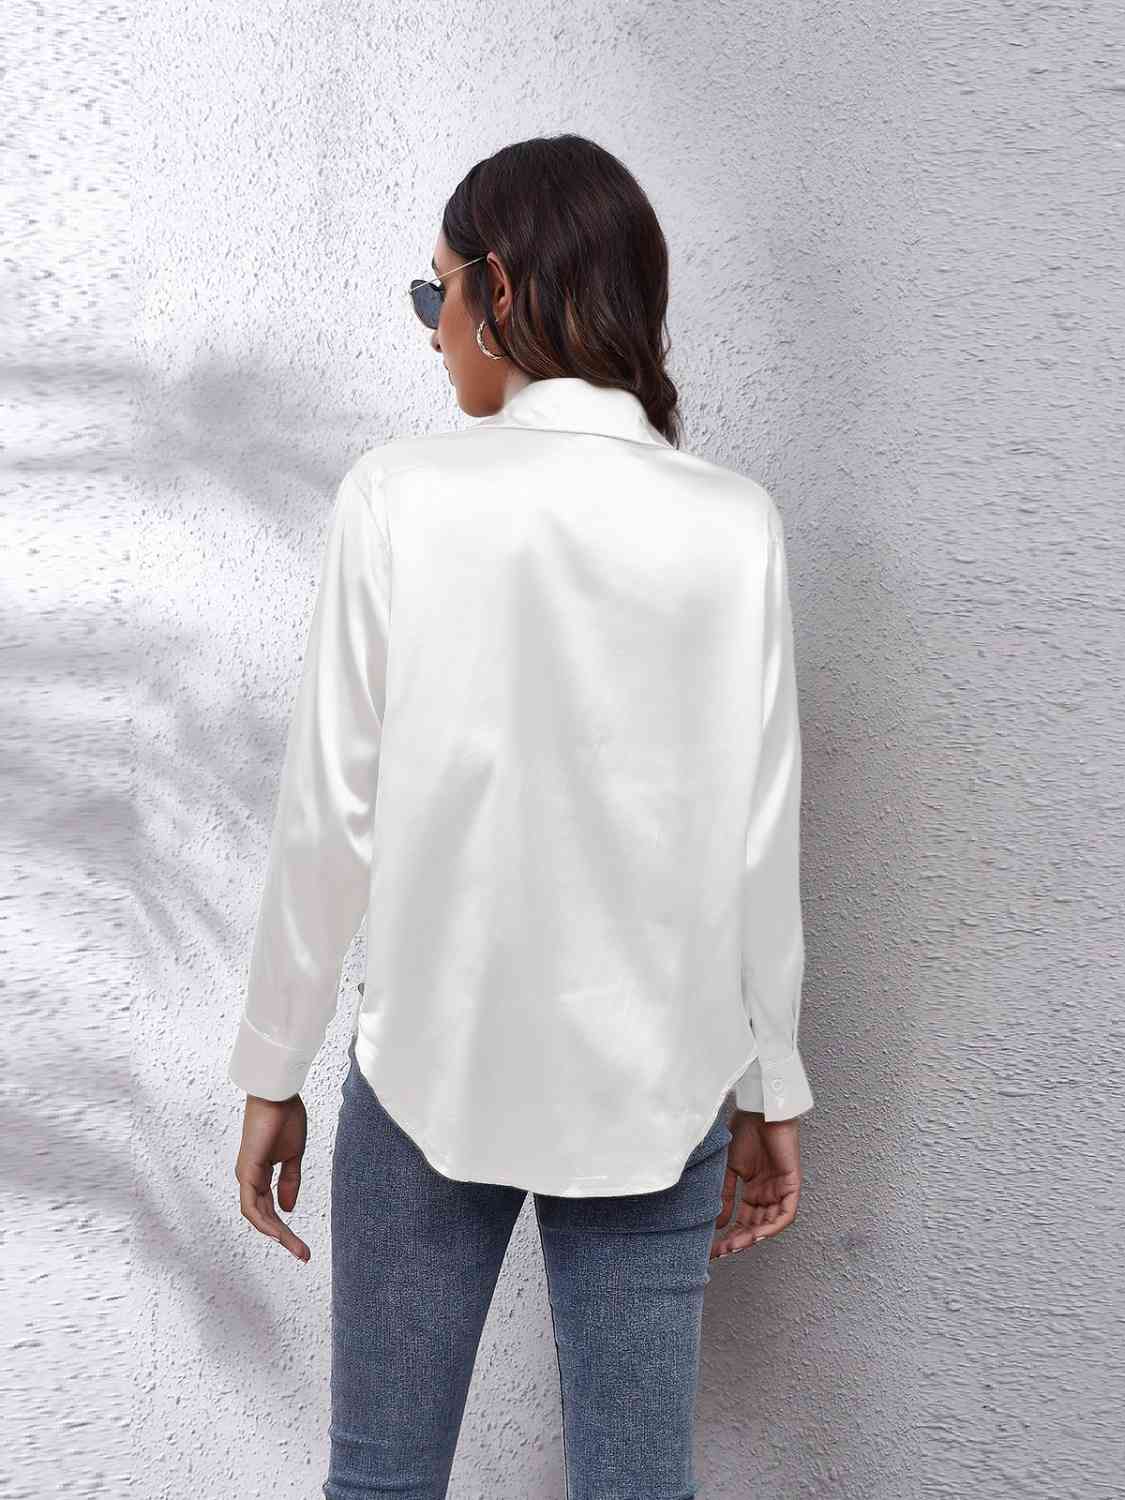 Collared Neck Buttoned Long Sleeve Shirt - Fashion Girl Online Store